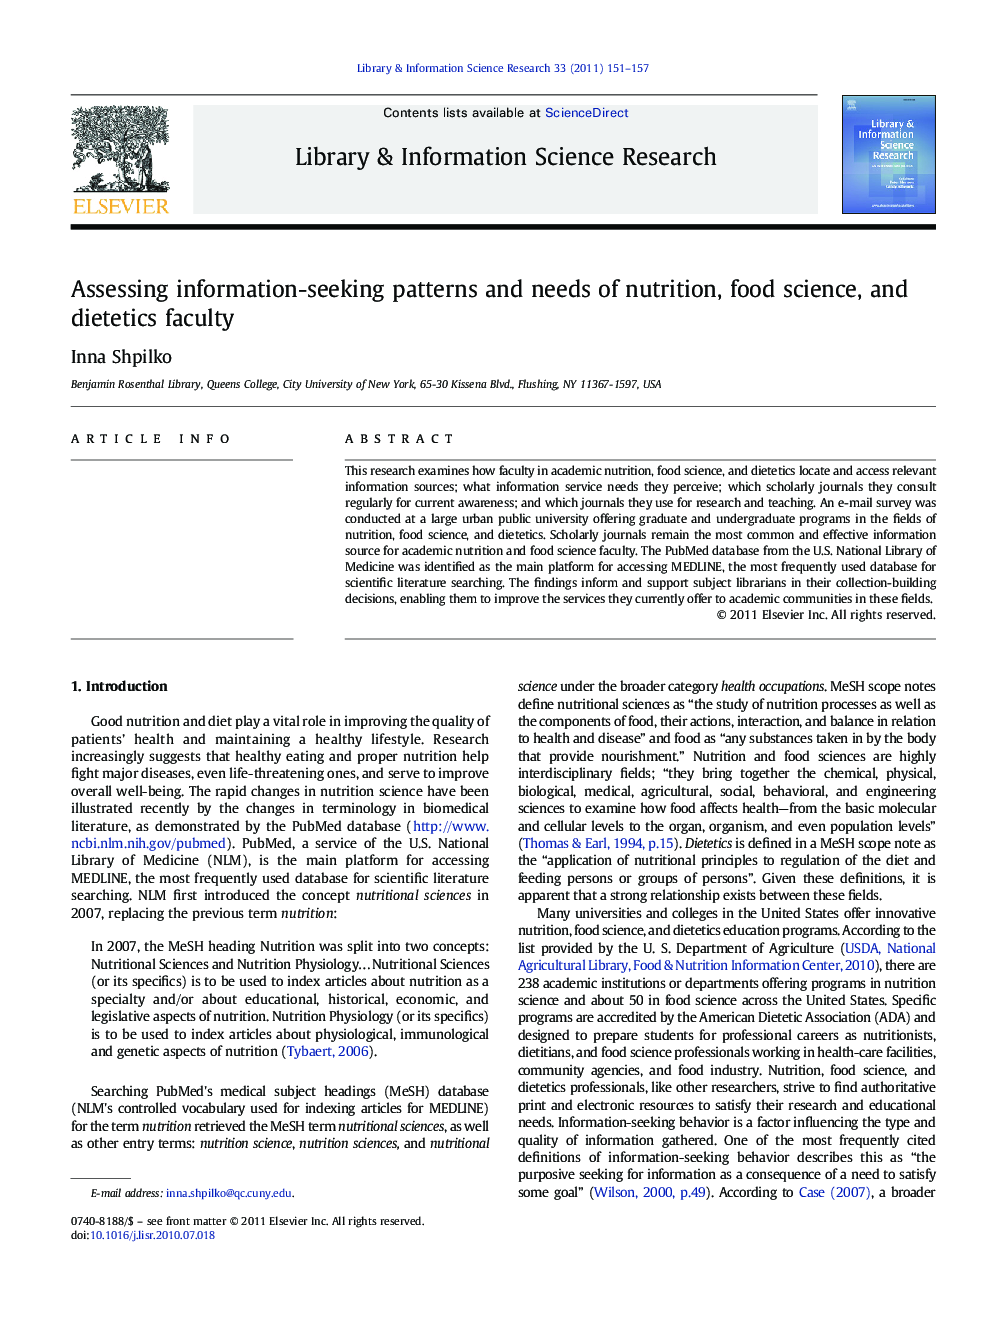 Assessing information-seeking patterns and needs of nutrition, food science, and dietetics faculty